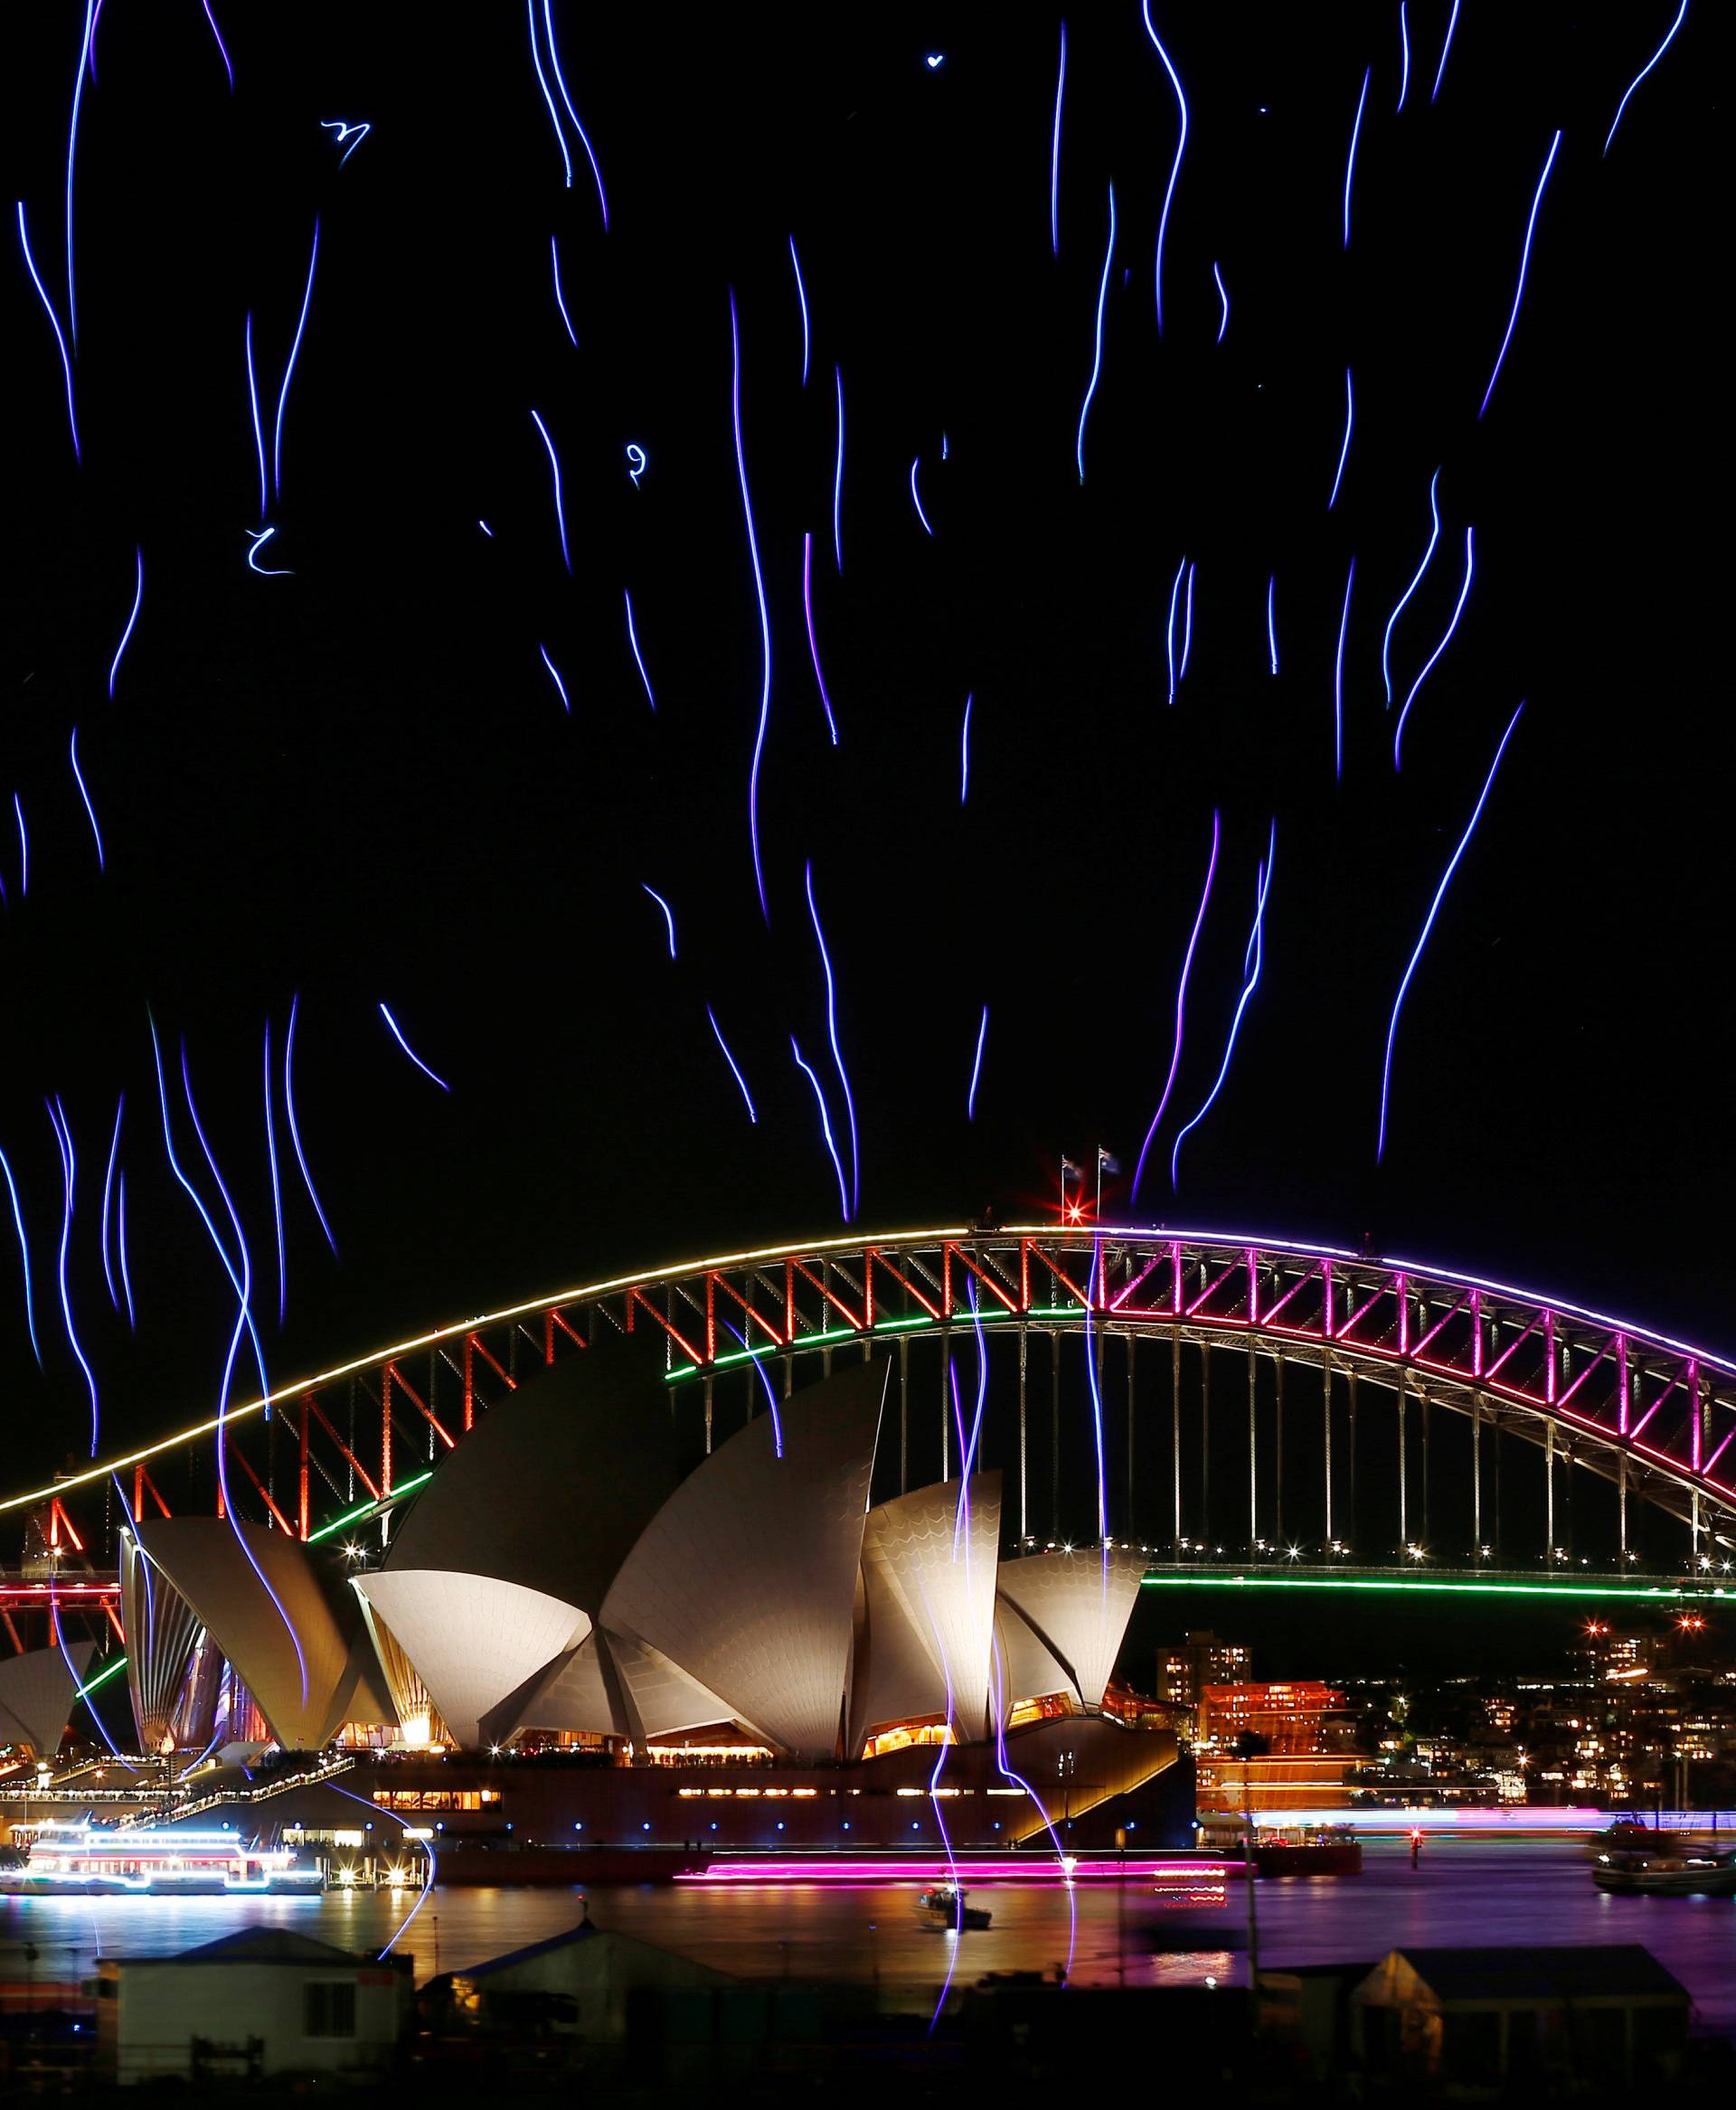 An aerial performance featuring 100 illuminated drones lift off from a barge on Sydney Harbour in front the Sydney Harbour Bridge and Opera House during the Vivid Sydney light festival in Sydney